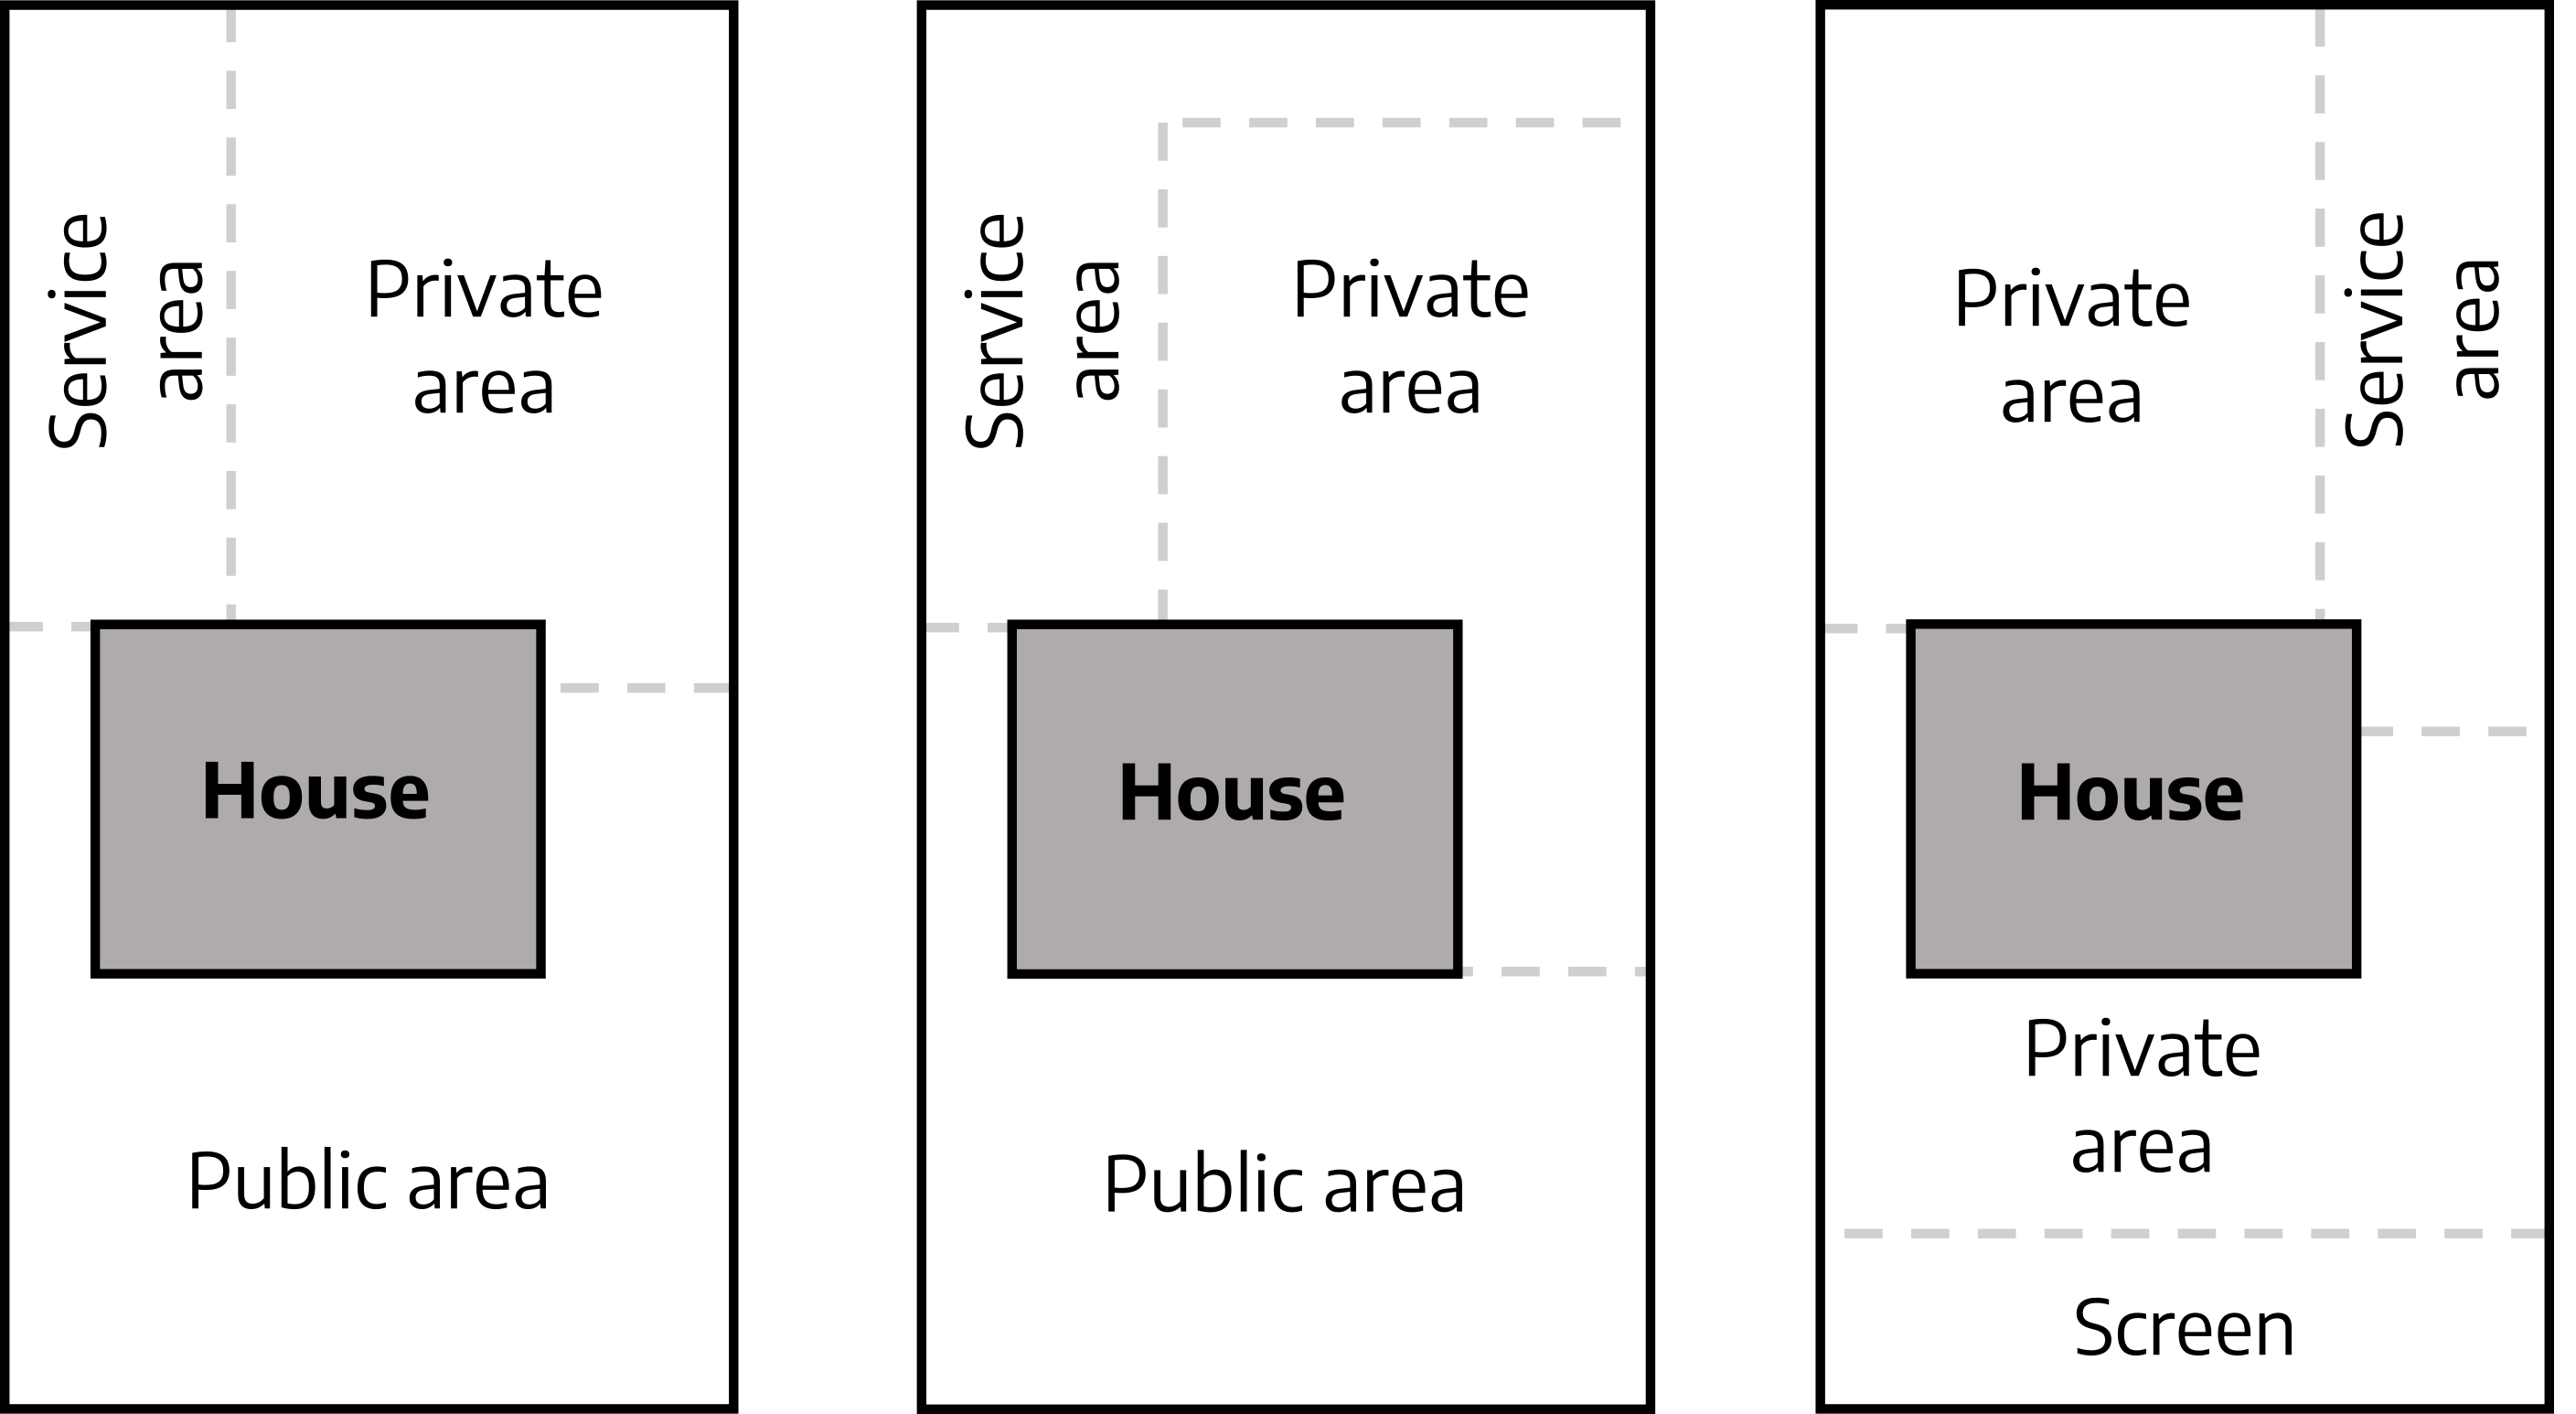 Three diagrams. The first is a large rectangle with a gray square marked "house" in the center, below the house is public area, above the house is a small dashed rectangle on the left side marked as service area, on the right side is a larger area marked private area. The second is a large rectangle with a gray square marked "house" in the center, below the house is a public area, above the house is a smaller dashed rectangle that reaches over the top towards the right side marked service area, the remaining are on the right is marked private area. The third is a large rectangle with a gray square marked "house" in the center, below the house is a private area, the very bottom of the rectangle is marked screen, above the house is a rectangle on the left marked private area, the remaining area on the right is marked service area.